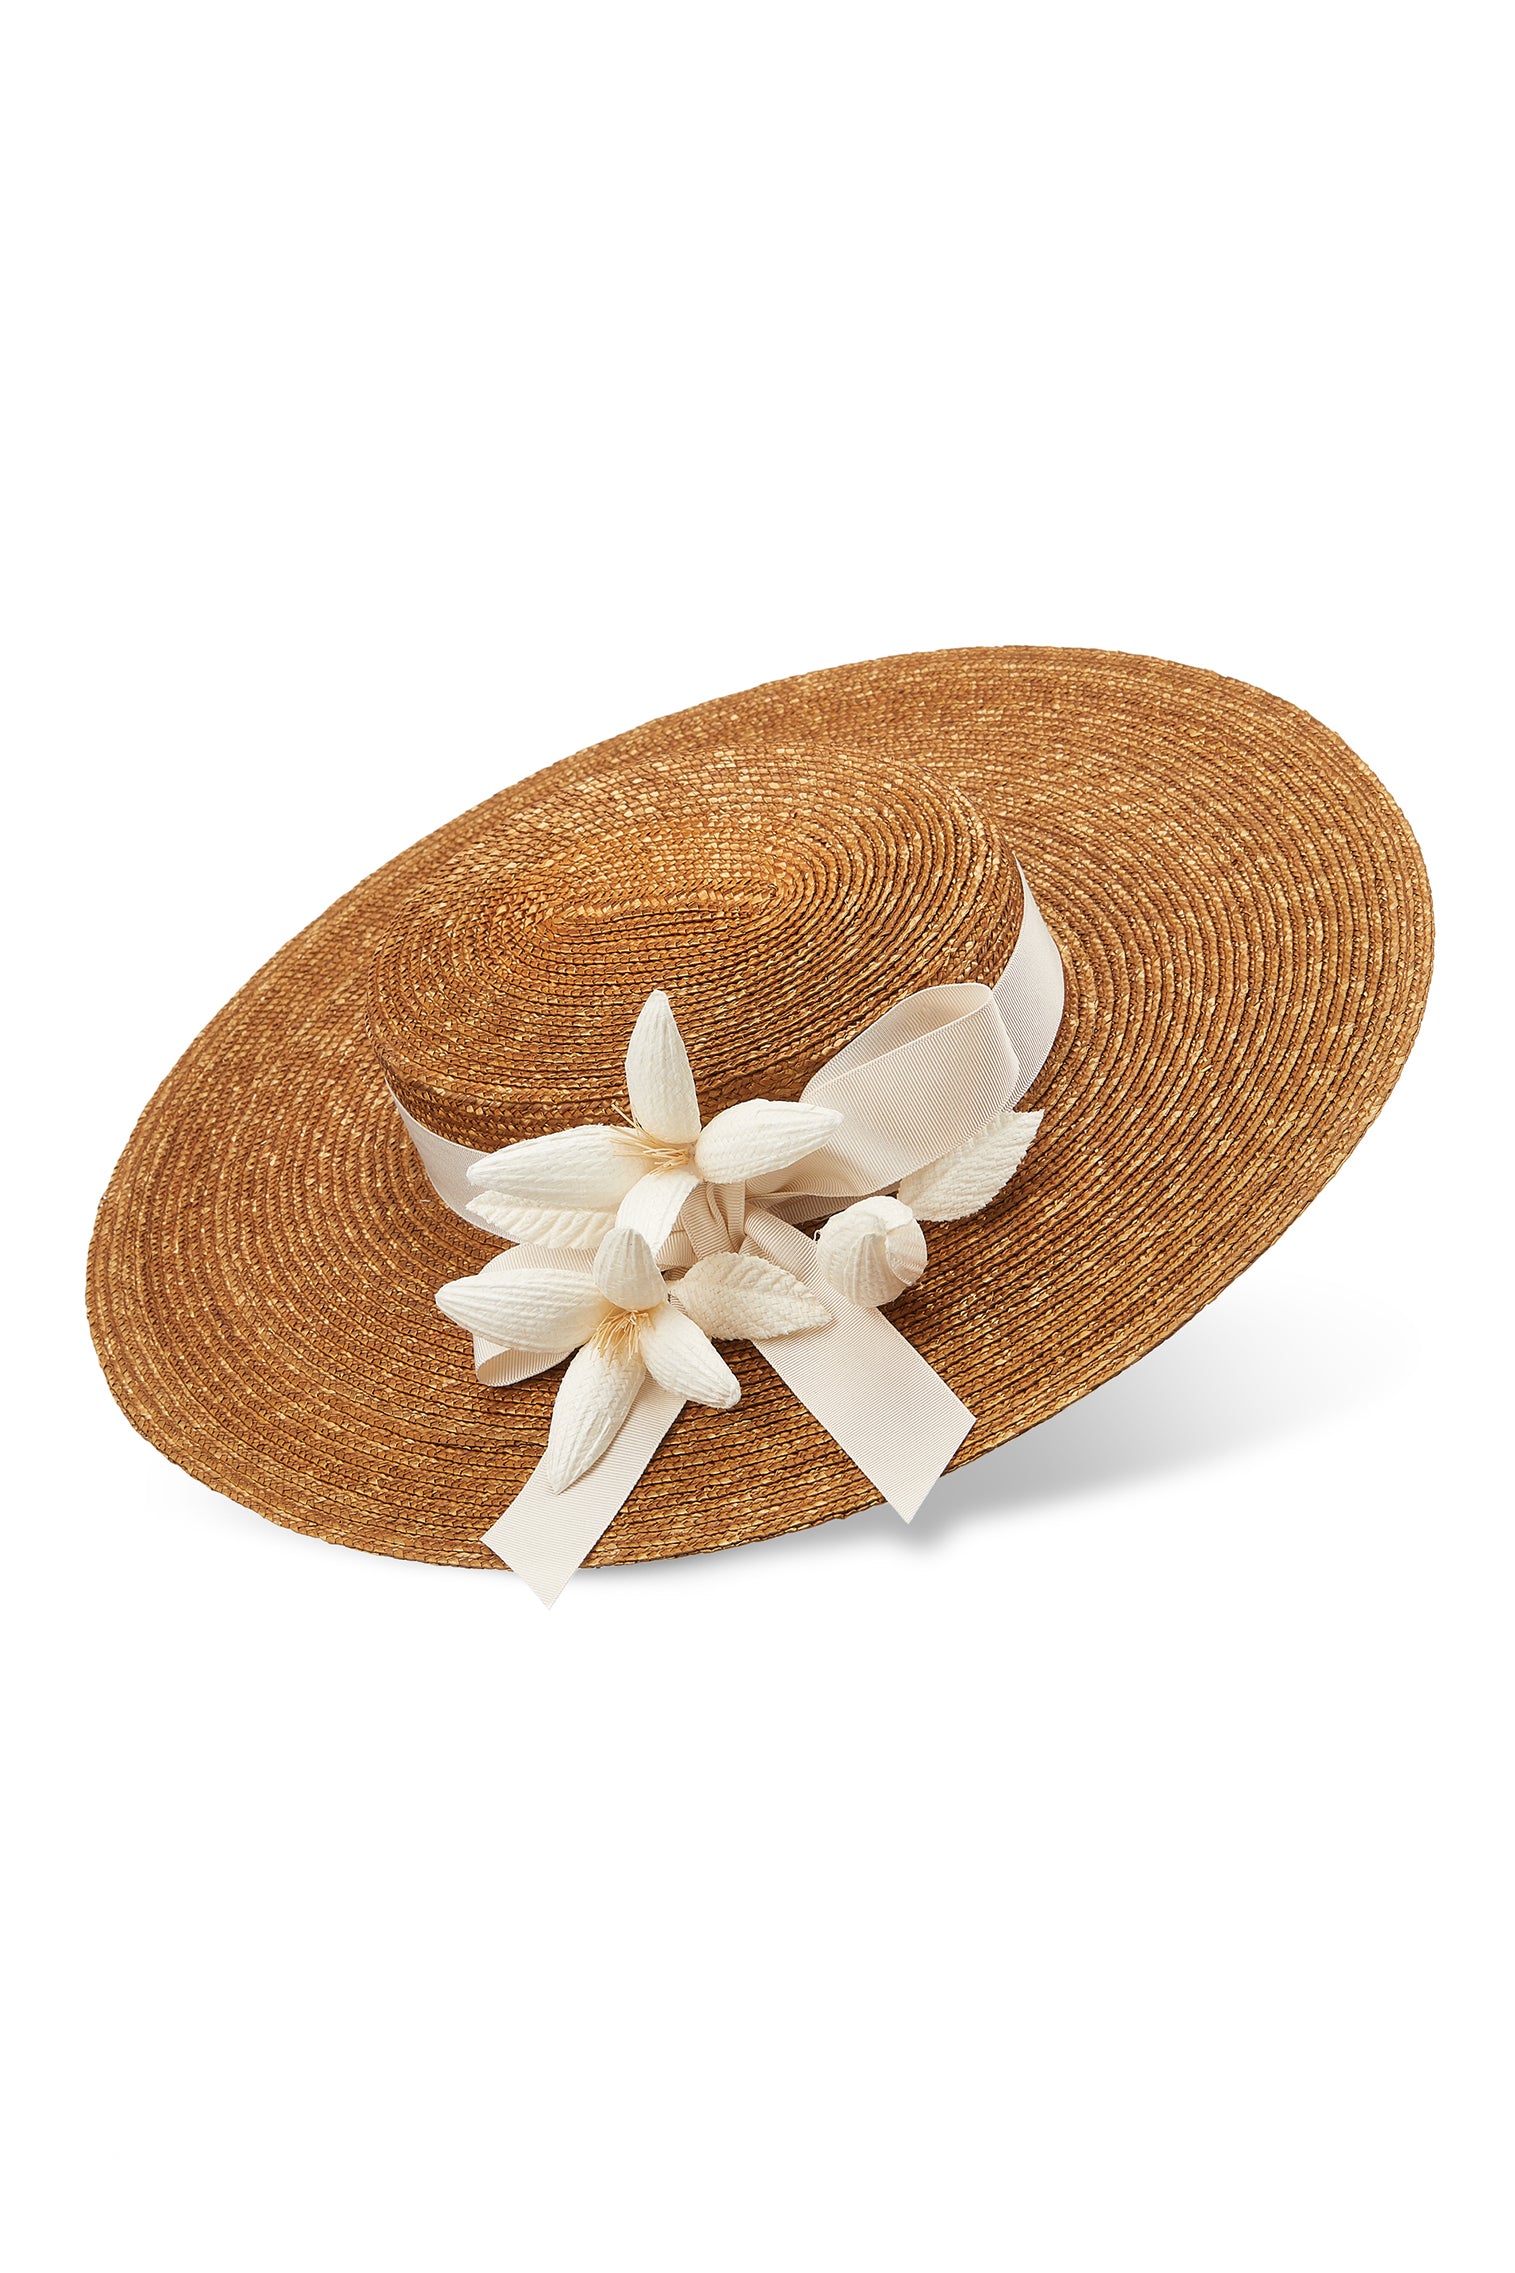 Chai Gold Boater - New Season Hat Collection - Lock & Co. Hatters London UK